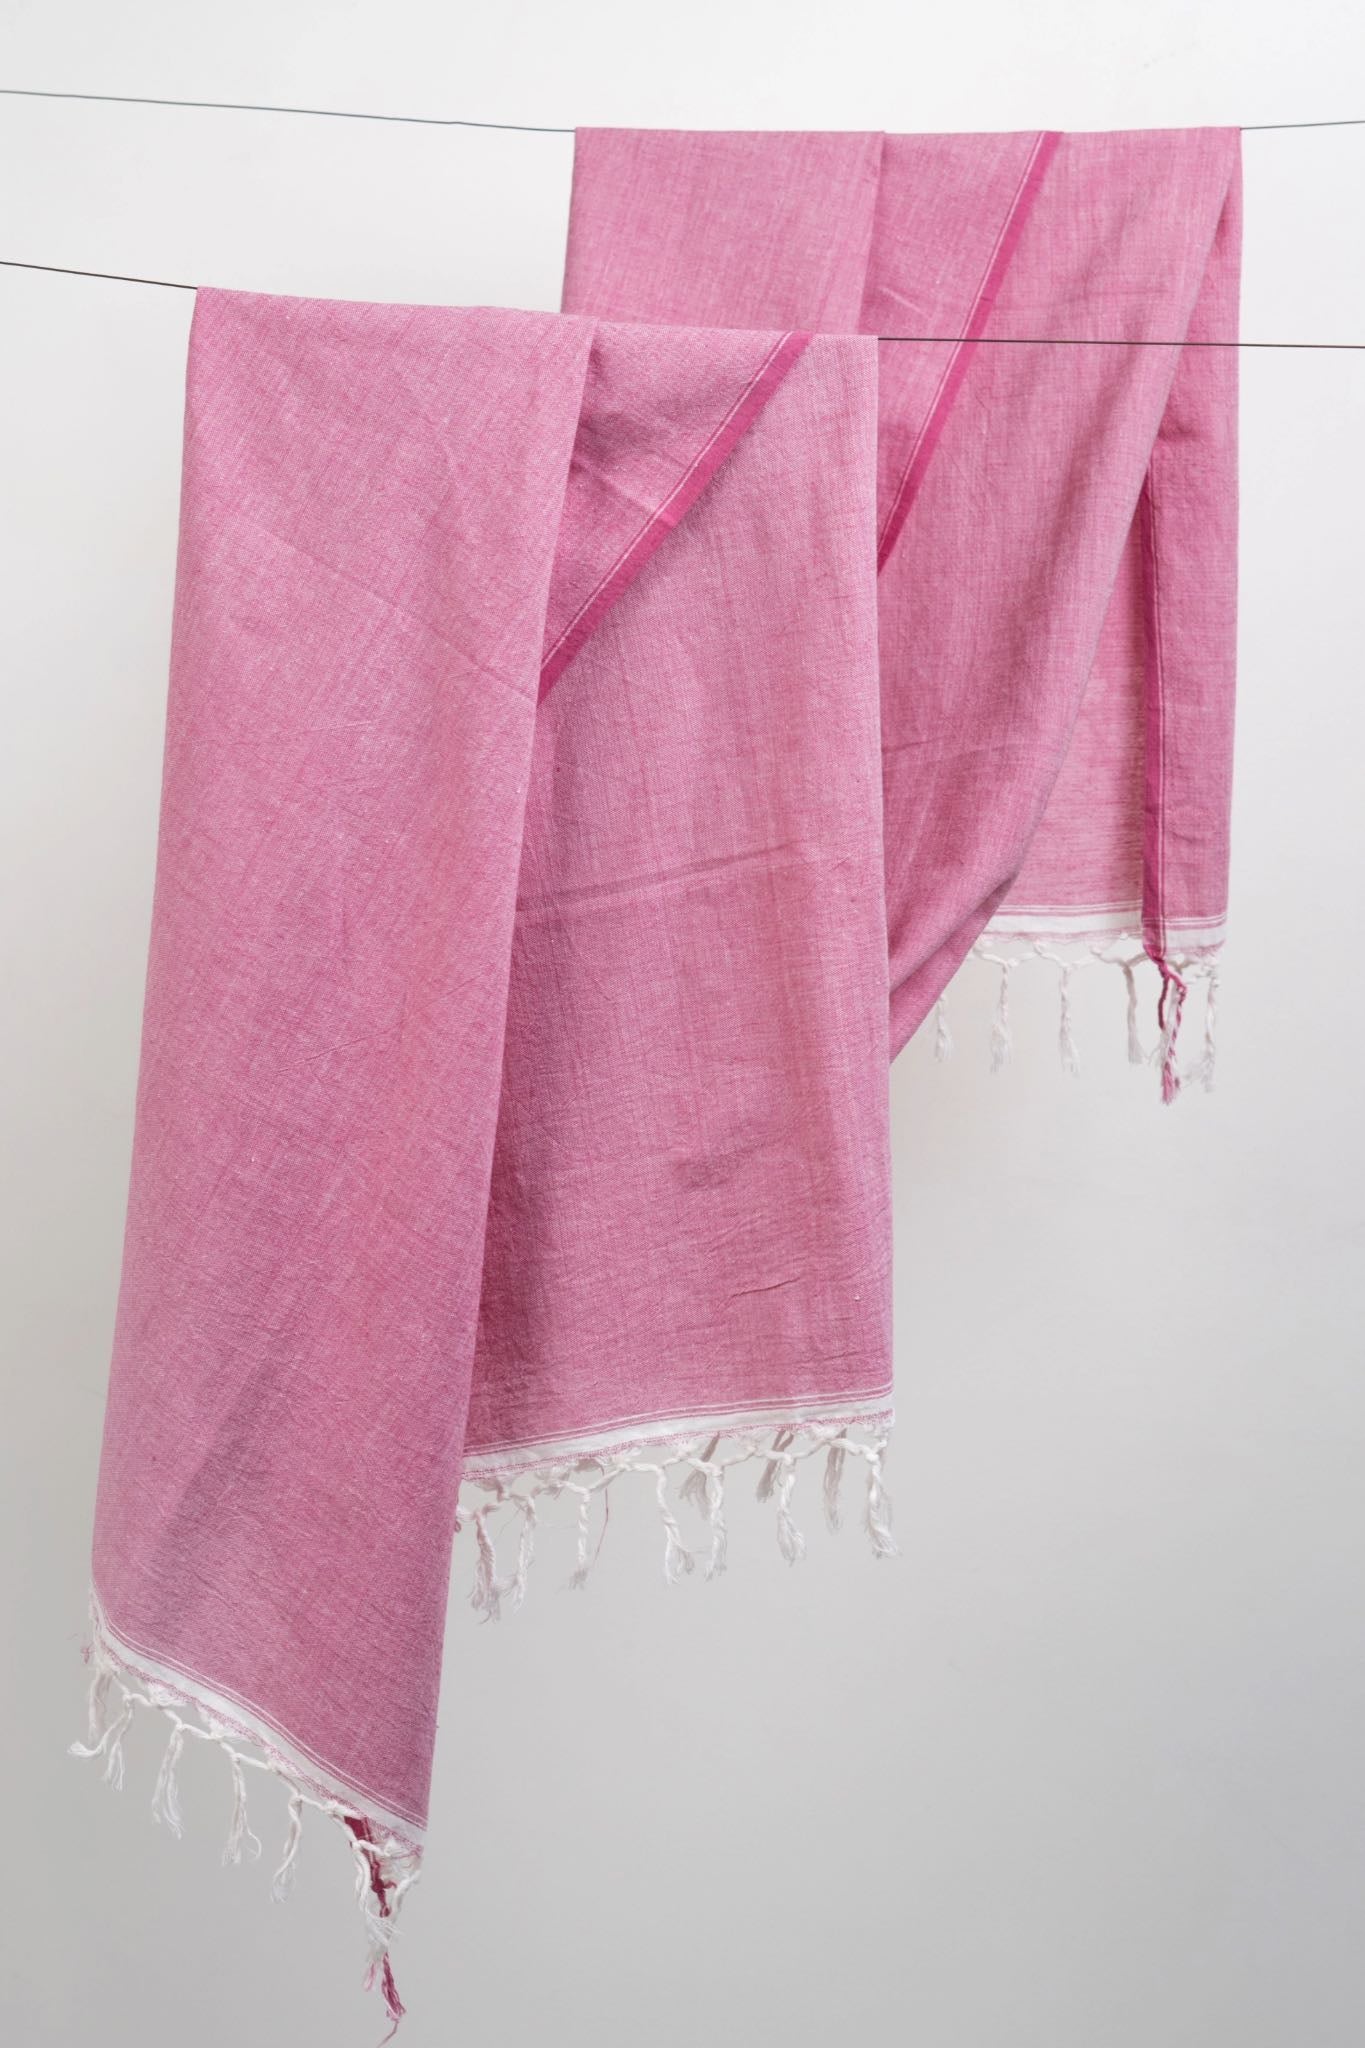 Hand-woven Cotton Towel , Pale Pink Chambray, Super soft and absorbent